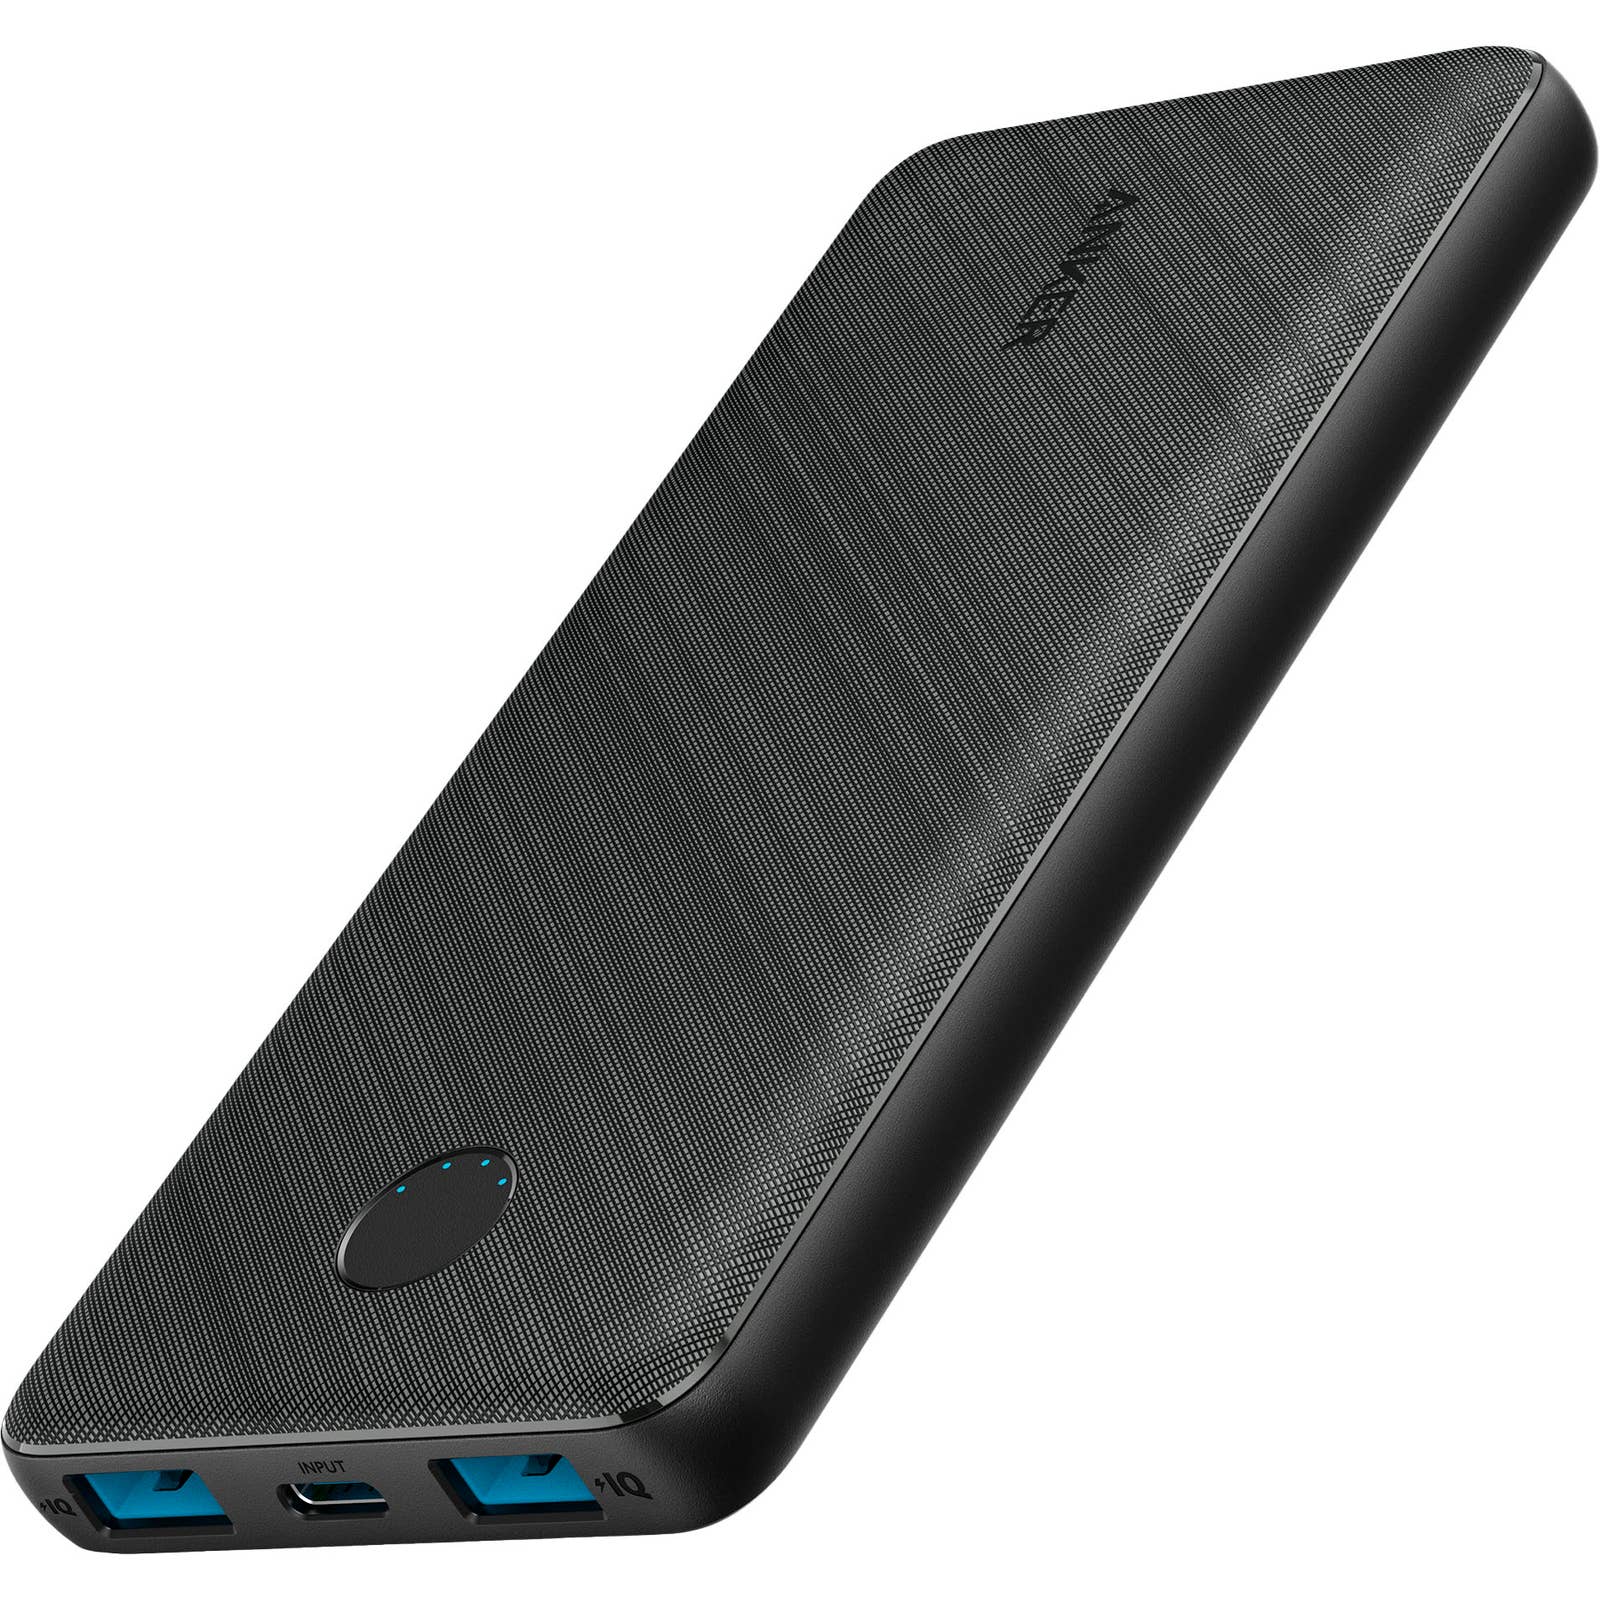 Anker - A1247H11-1 PowerCore III 10K mAh USB-C Portable Battery Charger - Black